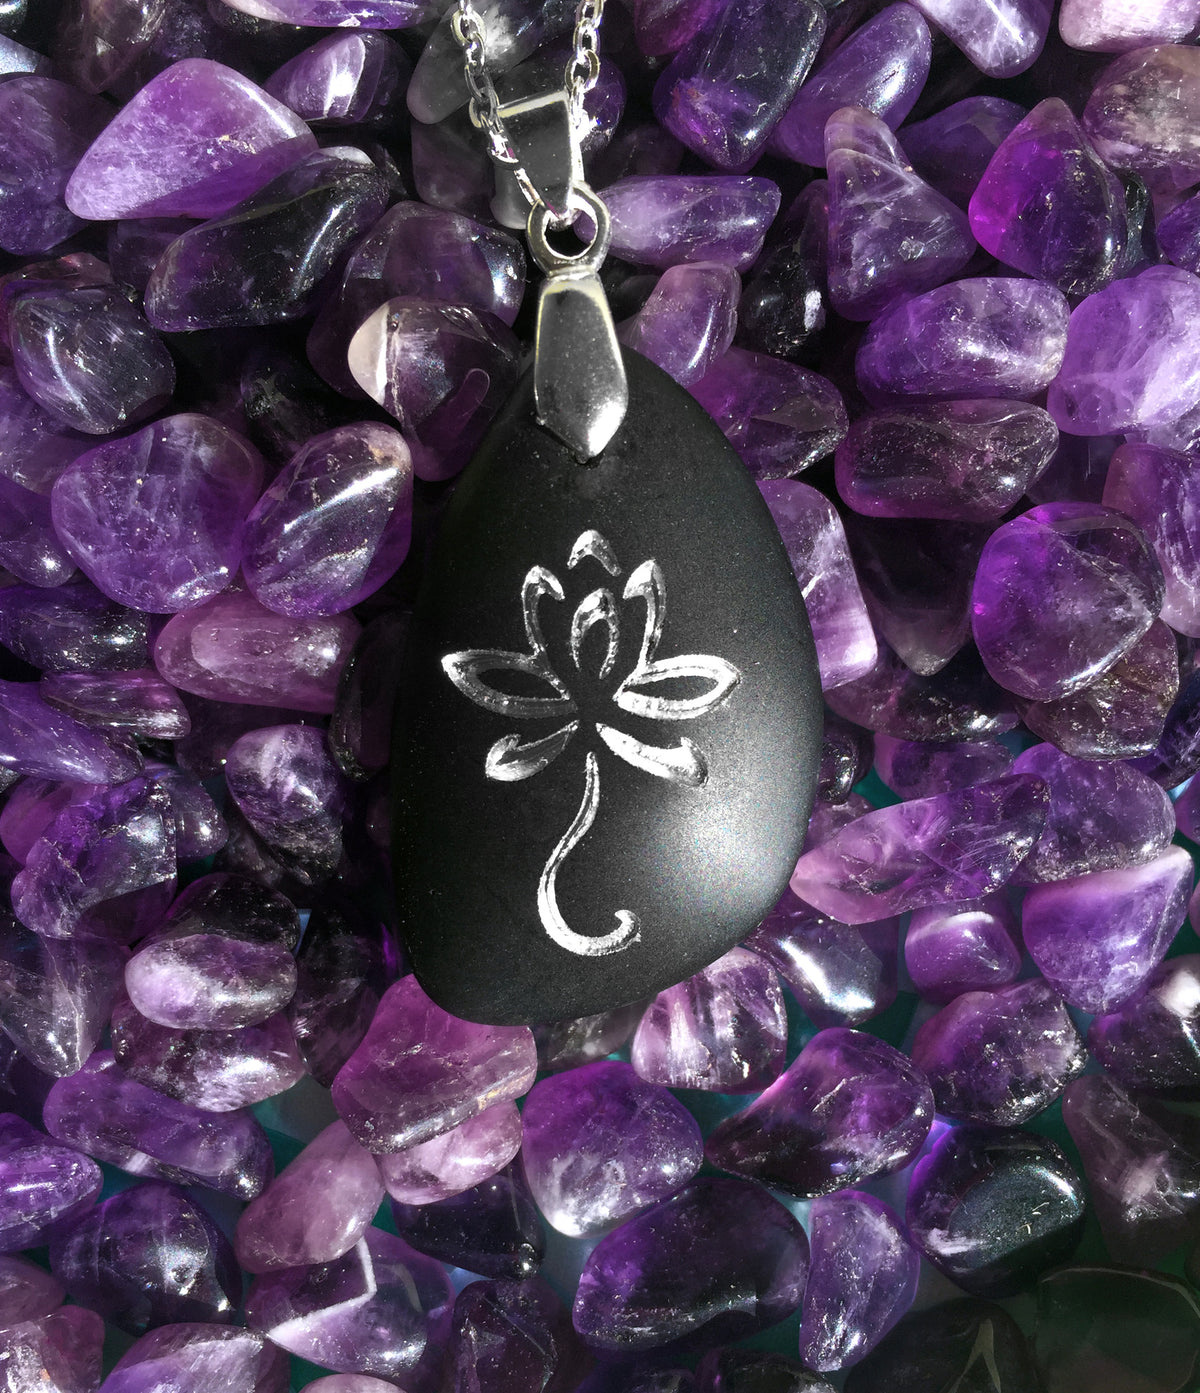 Lotus Flower in bloom engraved Ocean beach Sea Glass pendant - Symbol of Peace and Pureness in Life - Cast a Stone